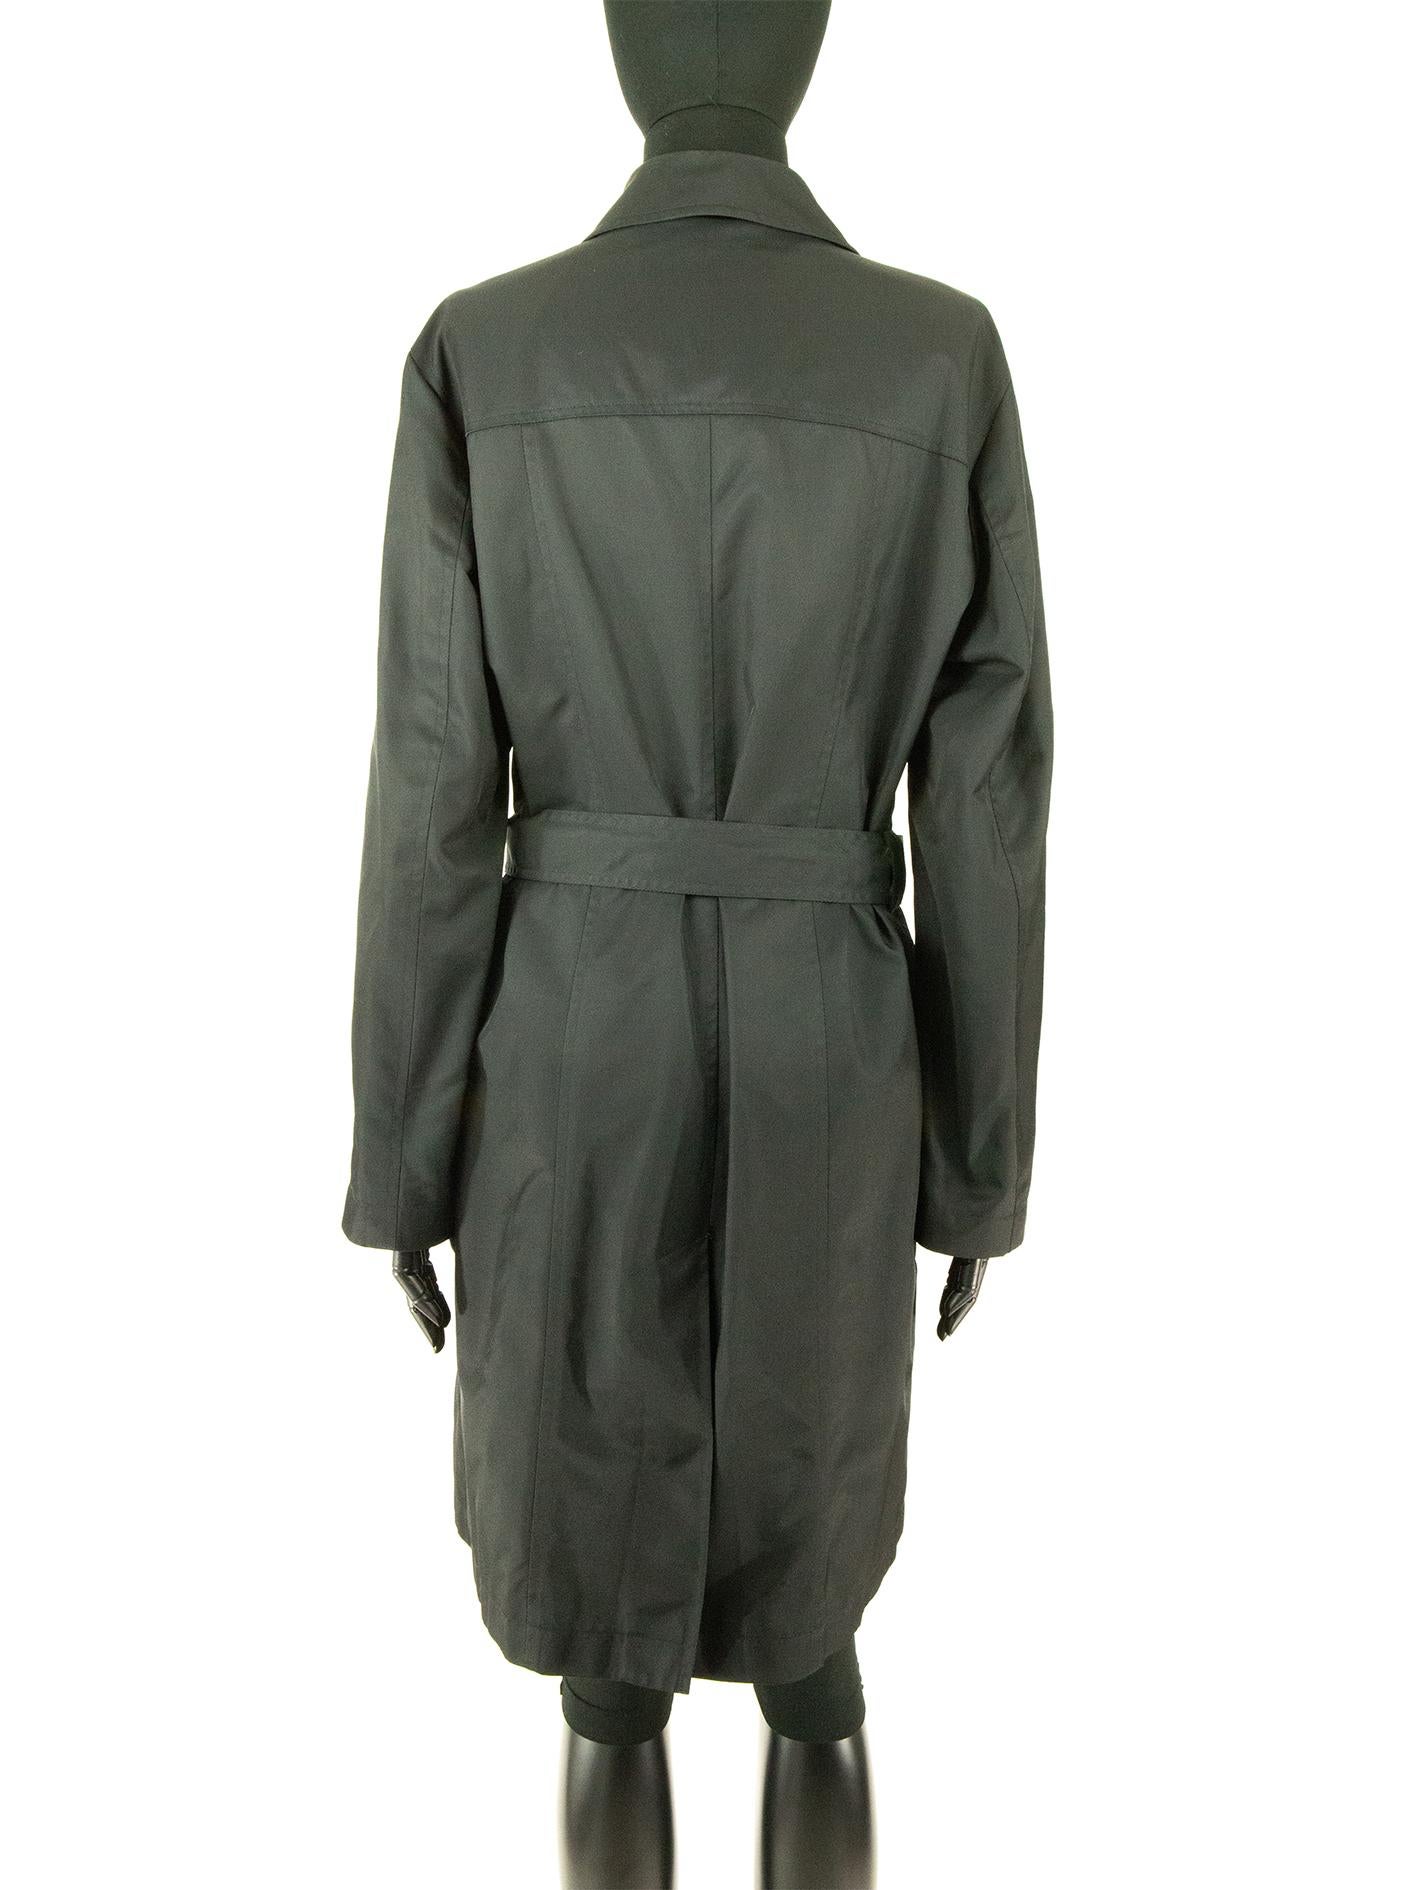 Women's or Men's 1980s Chanel Black Belted Trench Coat For Sale